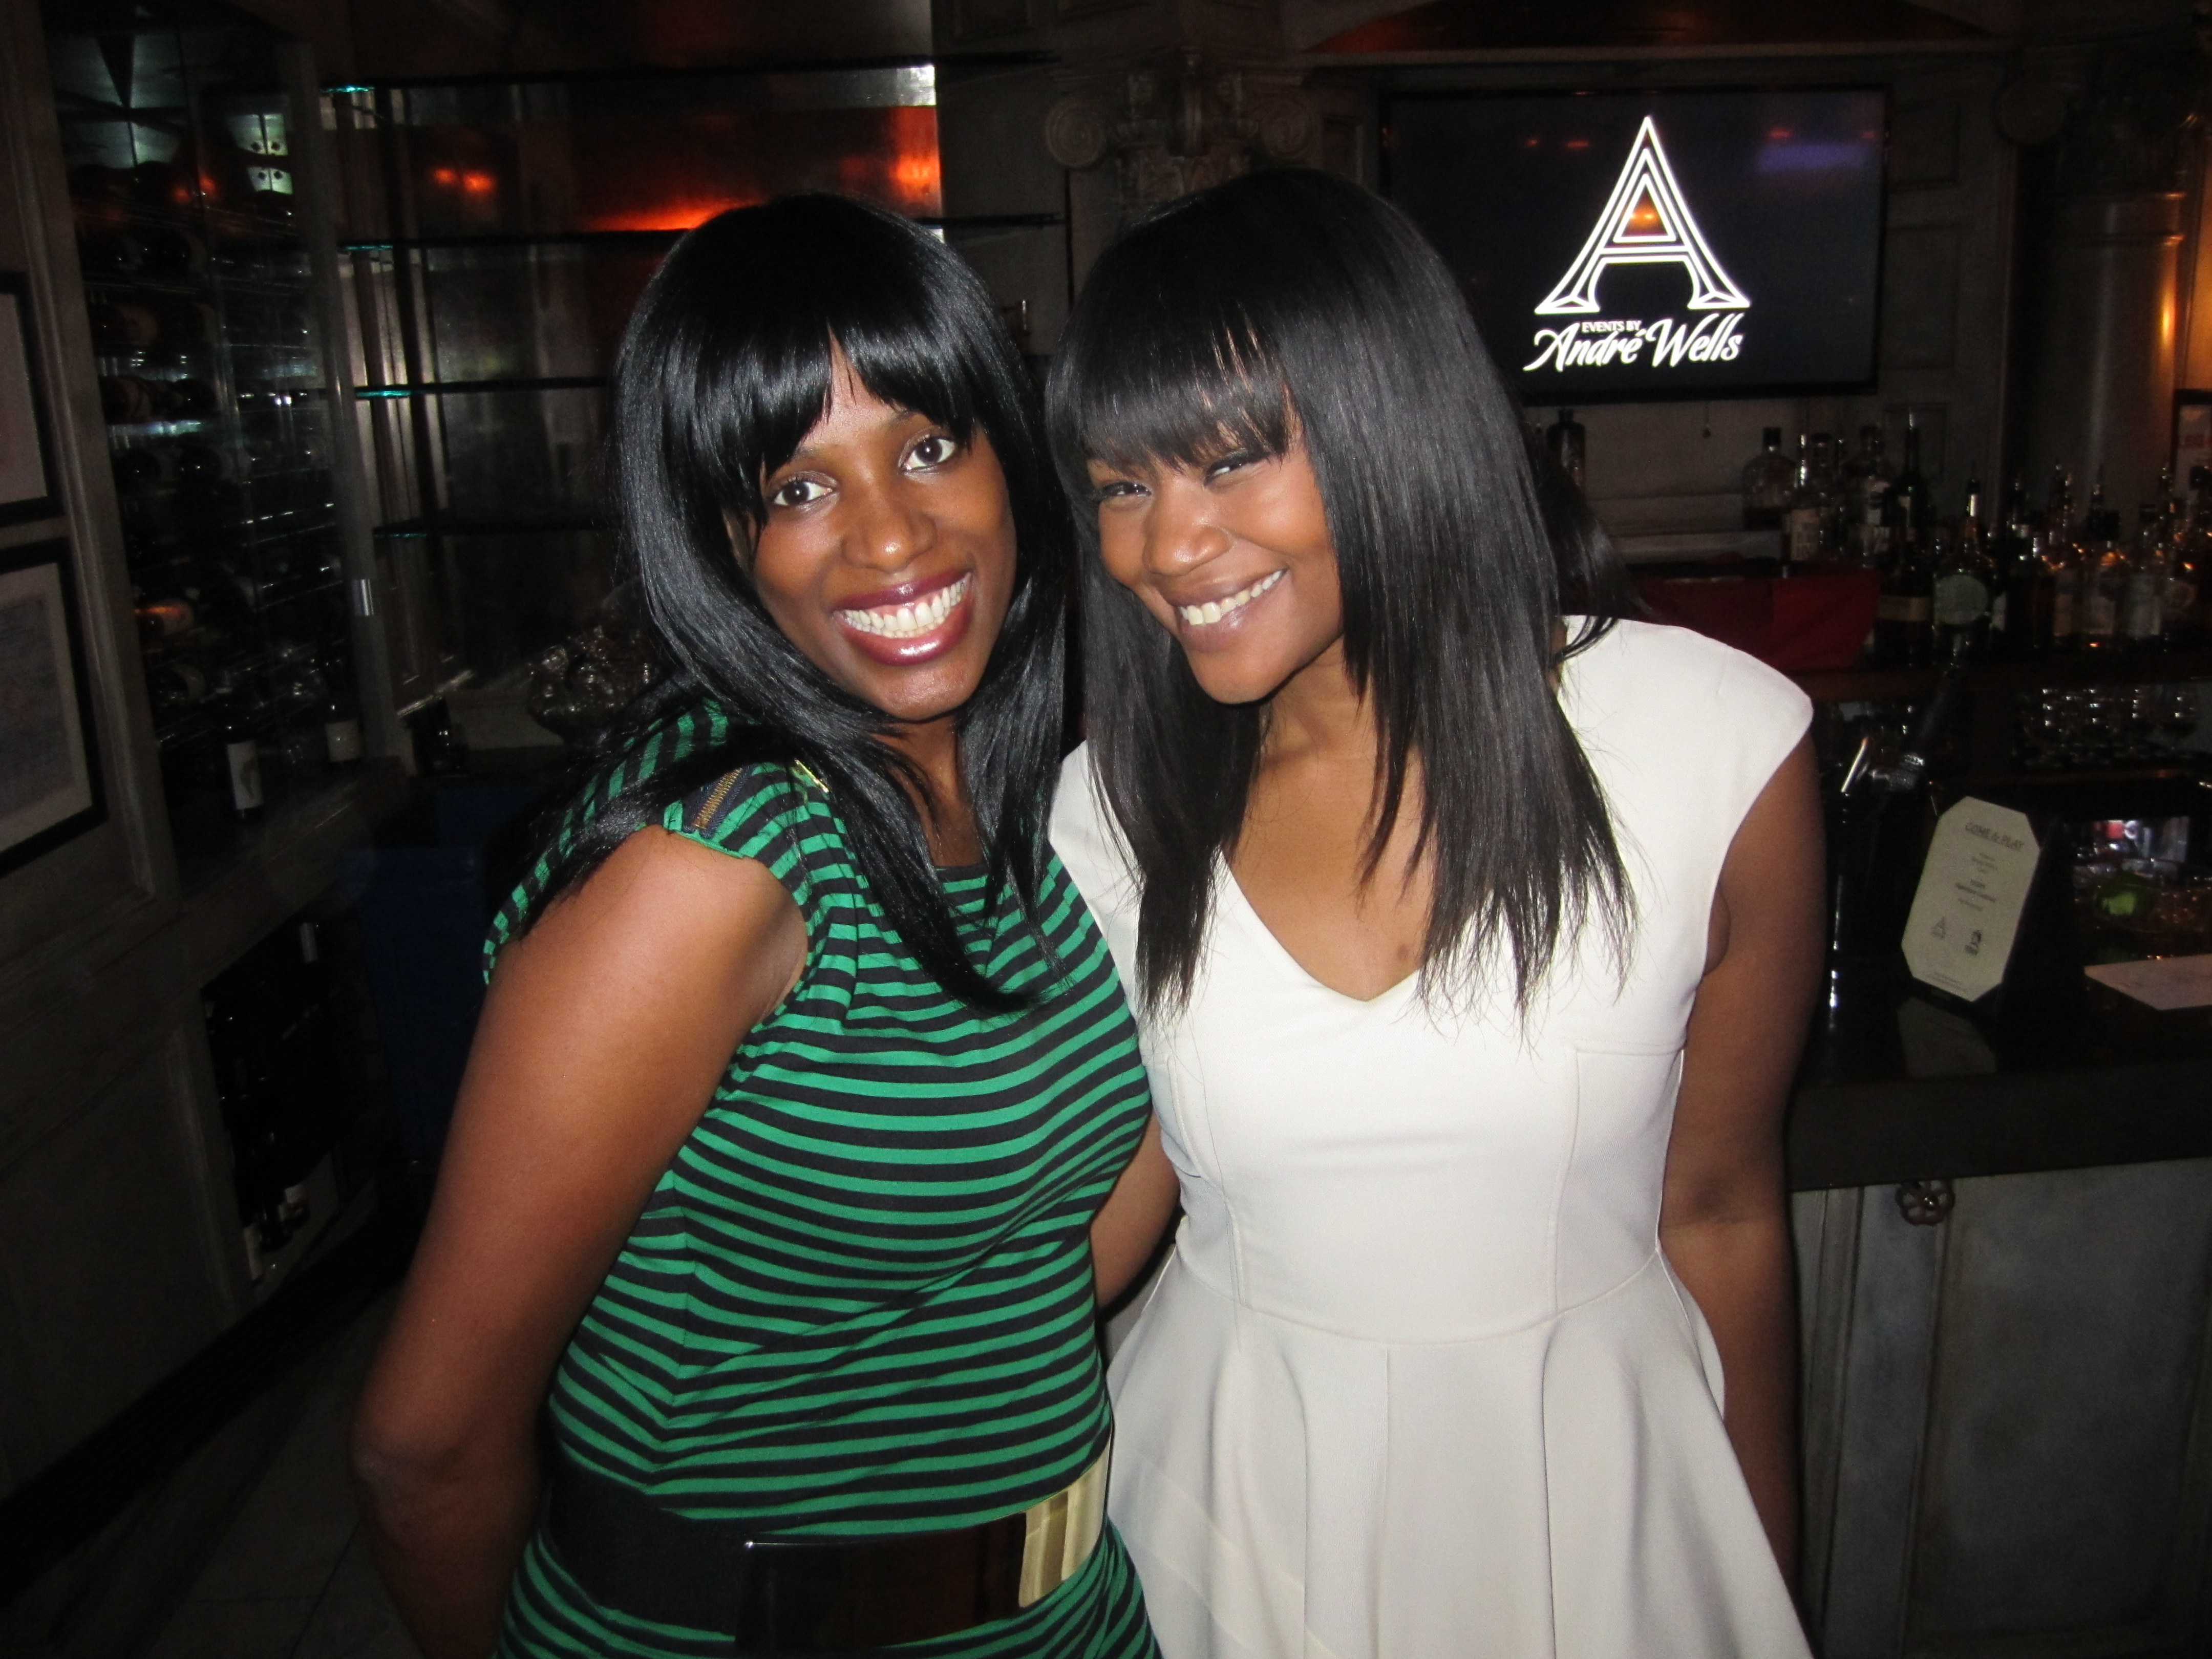 [Party Pix] Inside Andre Wells’ PLAY Party at Teddy